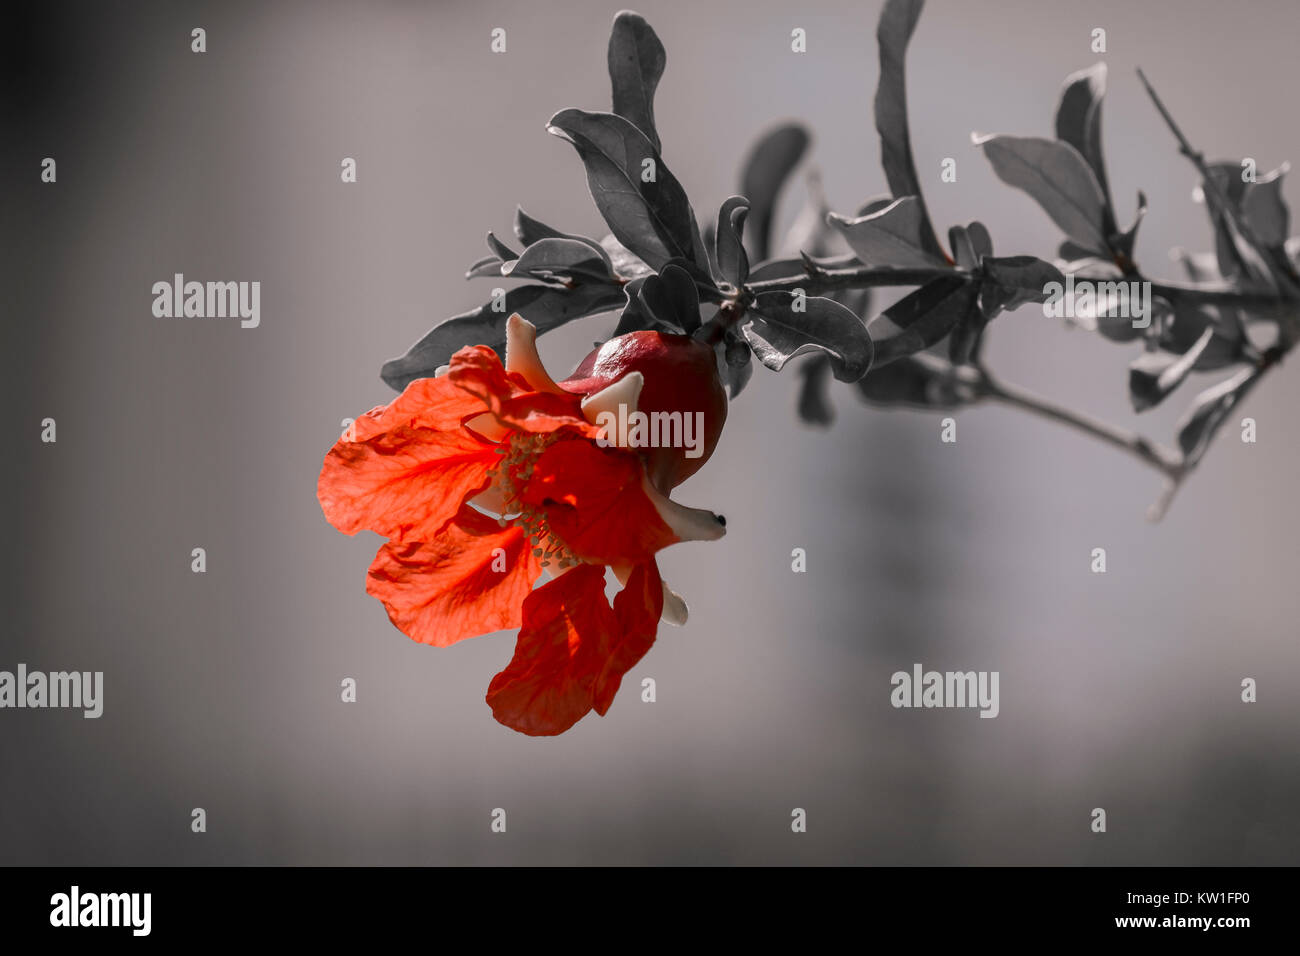 Red flower of a pomegranate tree on a blurred gray background with discolored leaves (Punica granatum) Stock Photo